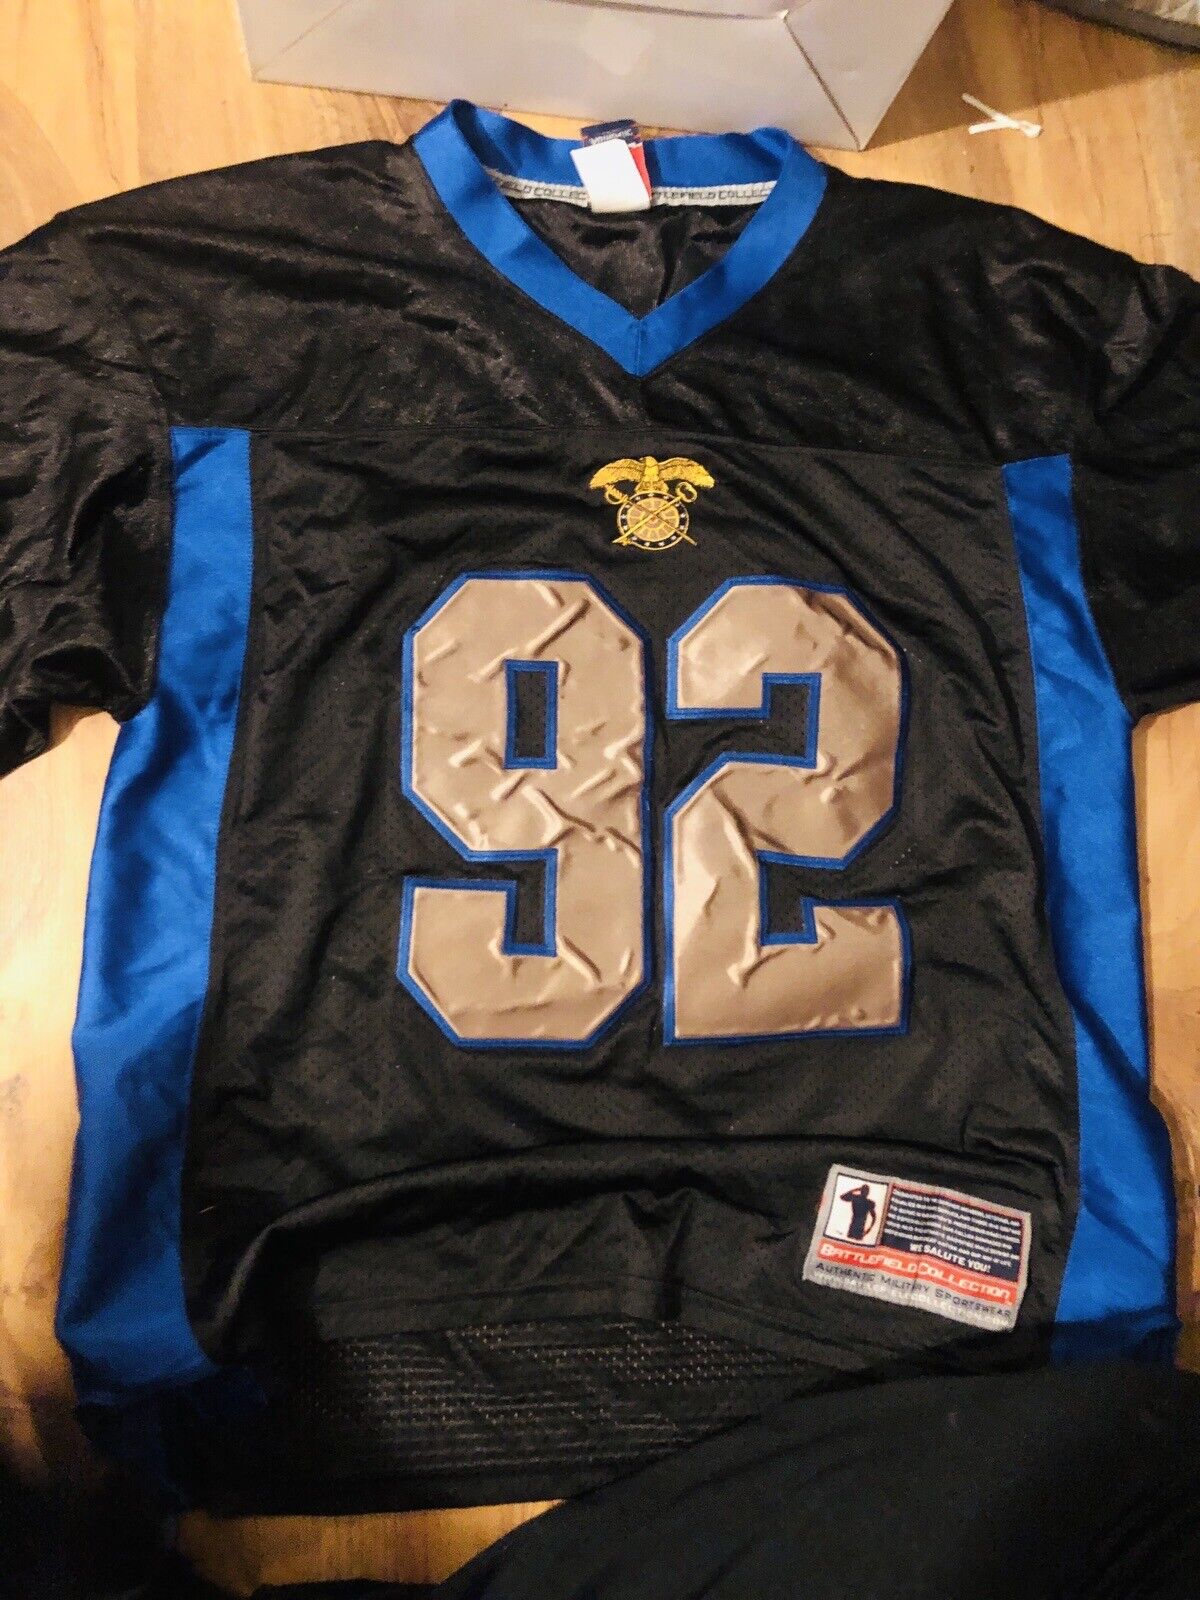 Black With Blue Jersey Authentic Military Sportswear In Good Condition.